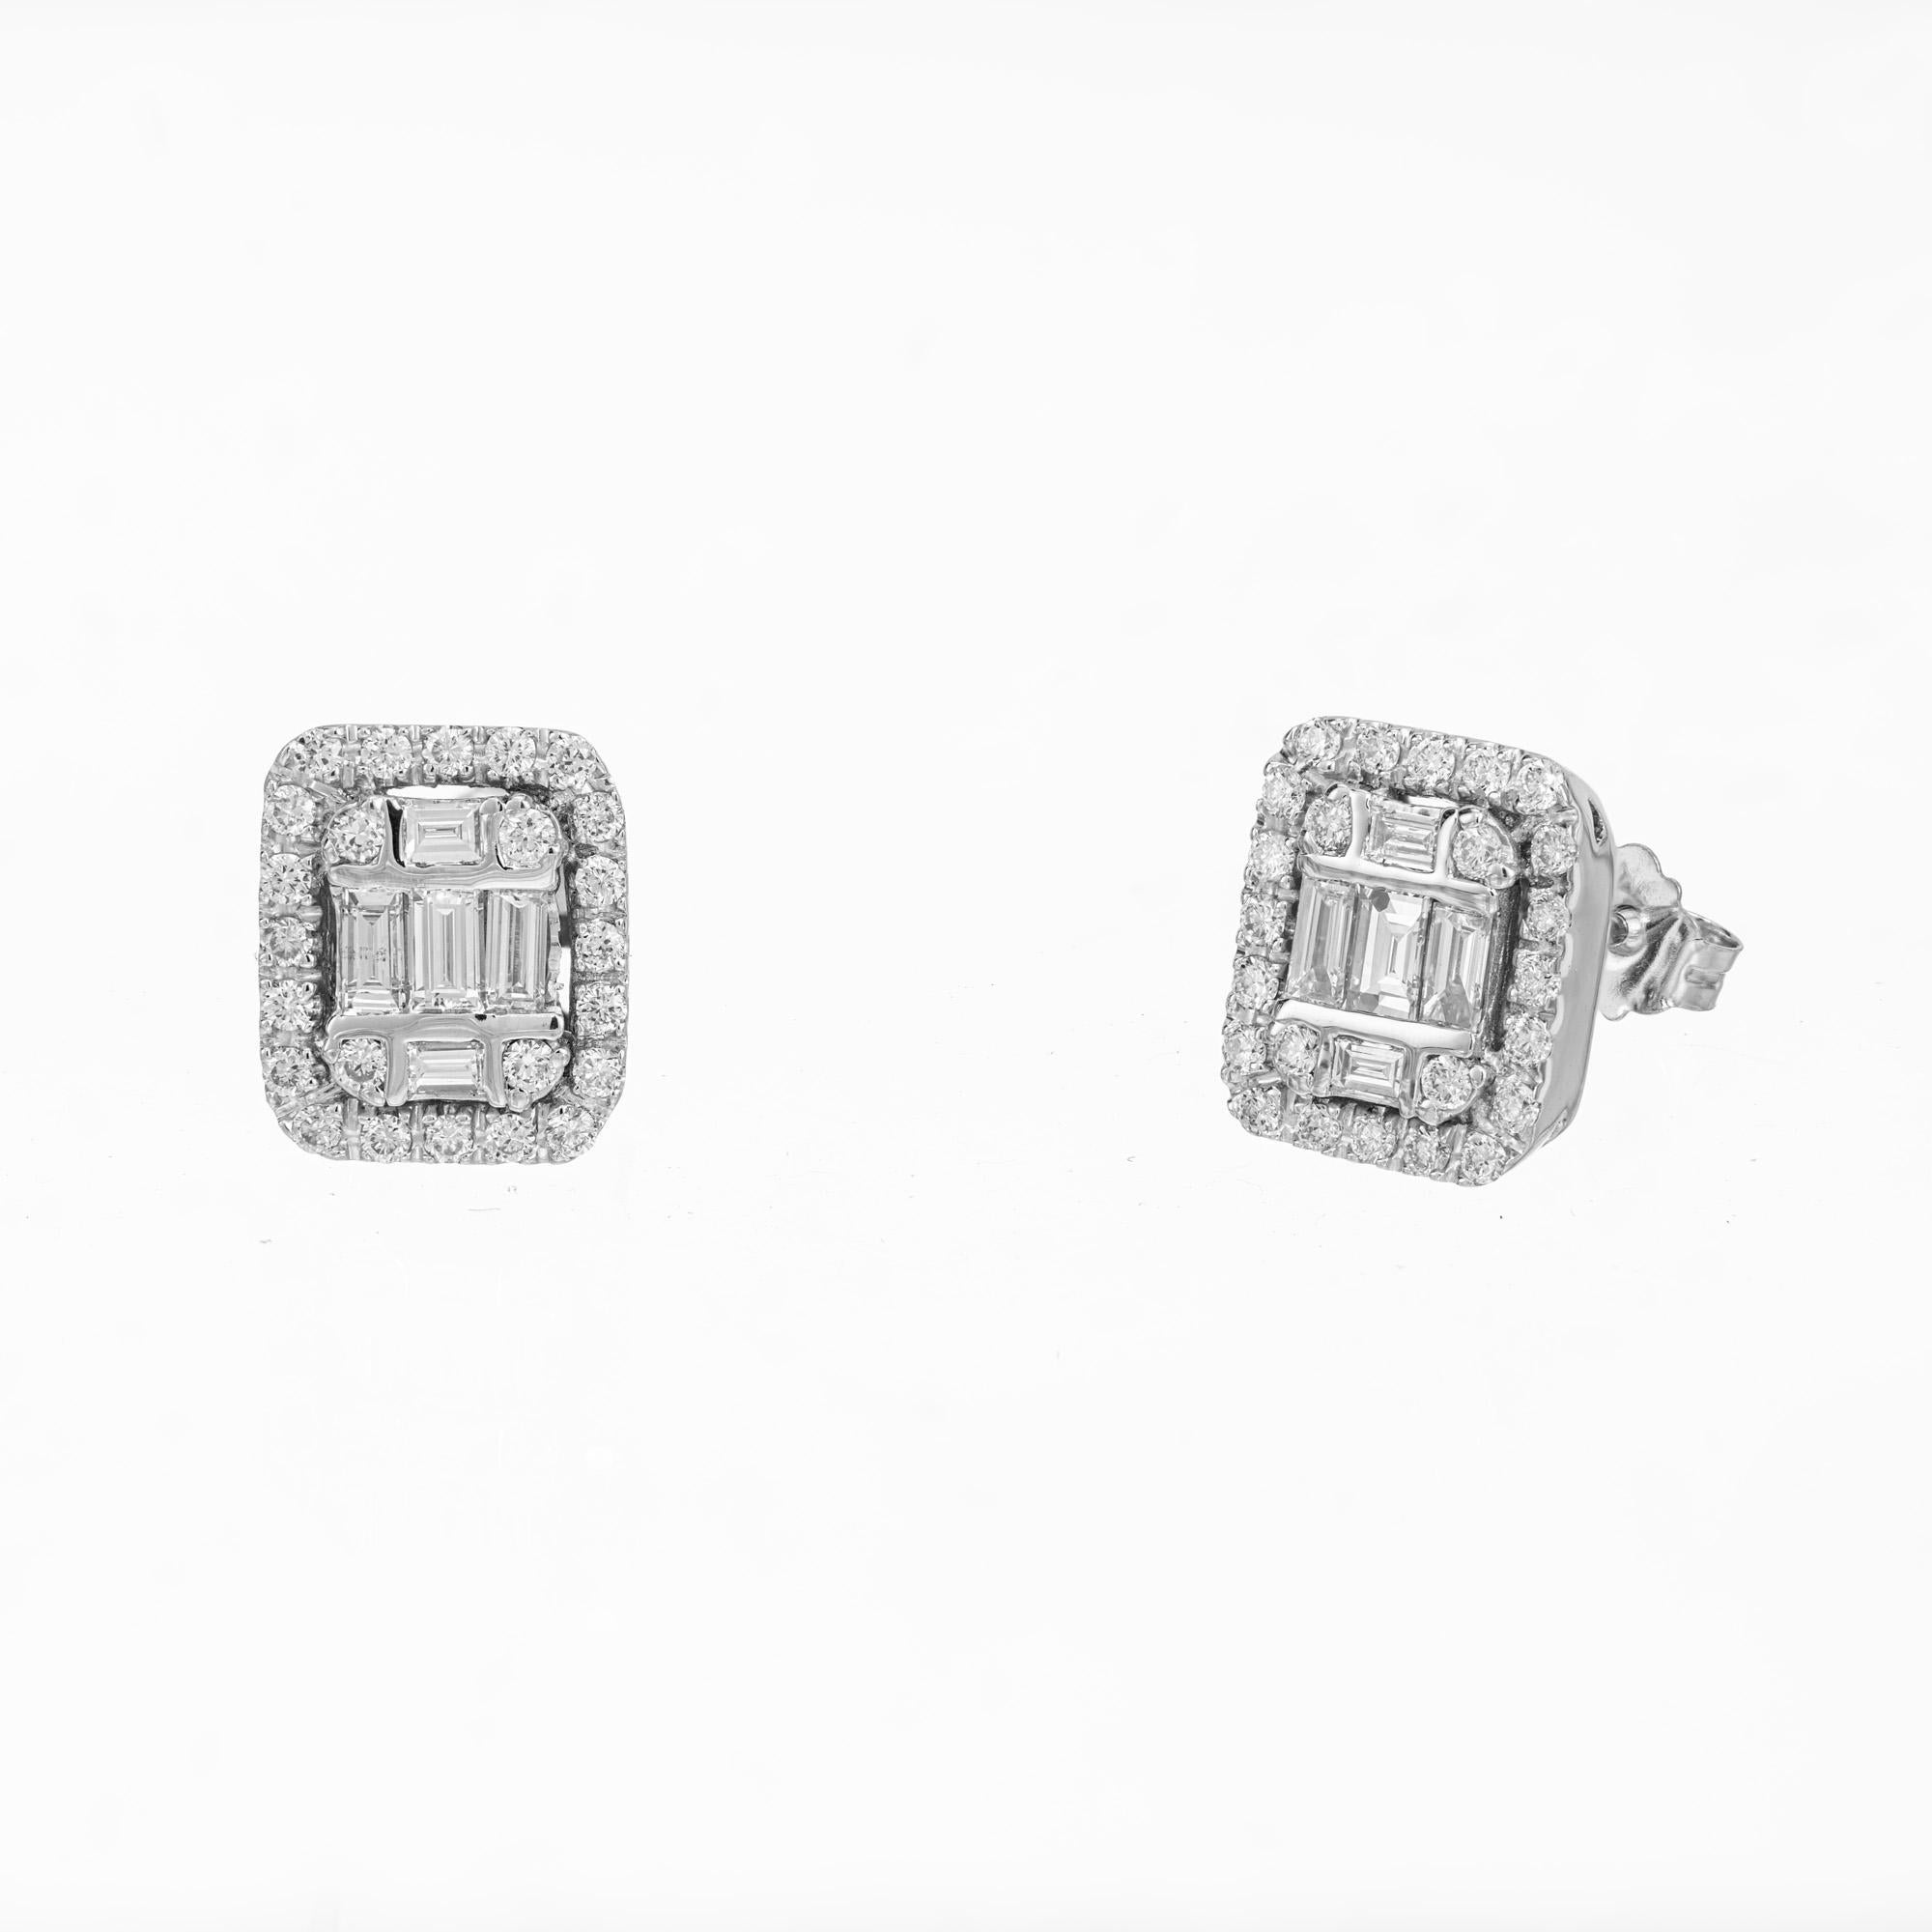 Stylish modern diamond rectangular earrings. Each earring has five baguette diamonds in the center and one round diamond in each corner. Both centers are haloed with round cut diamonds. These earrings have great brilliance along with a matching